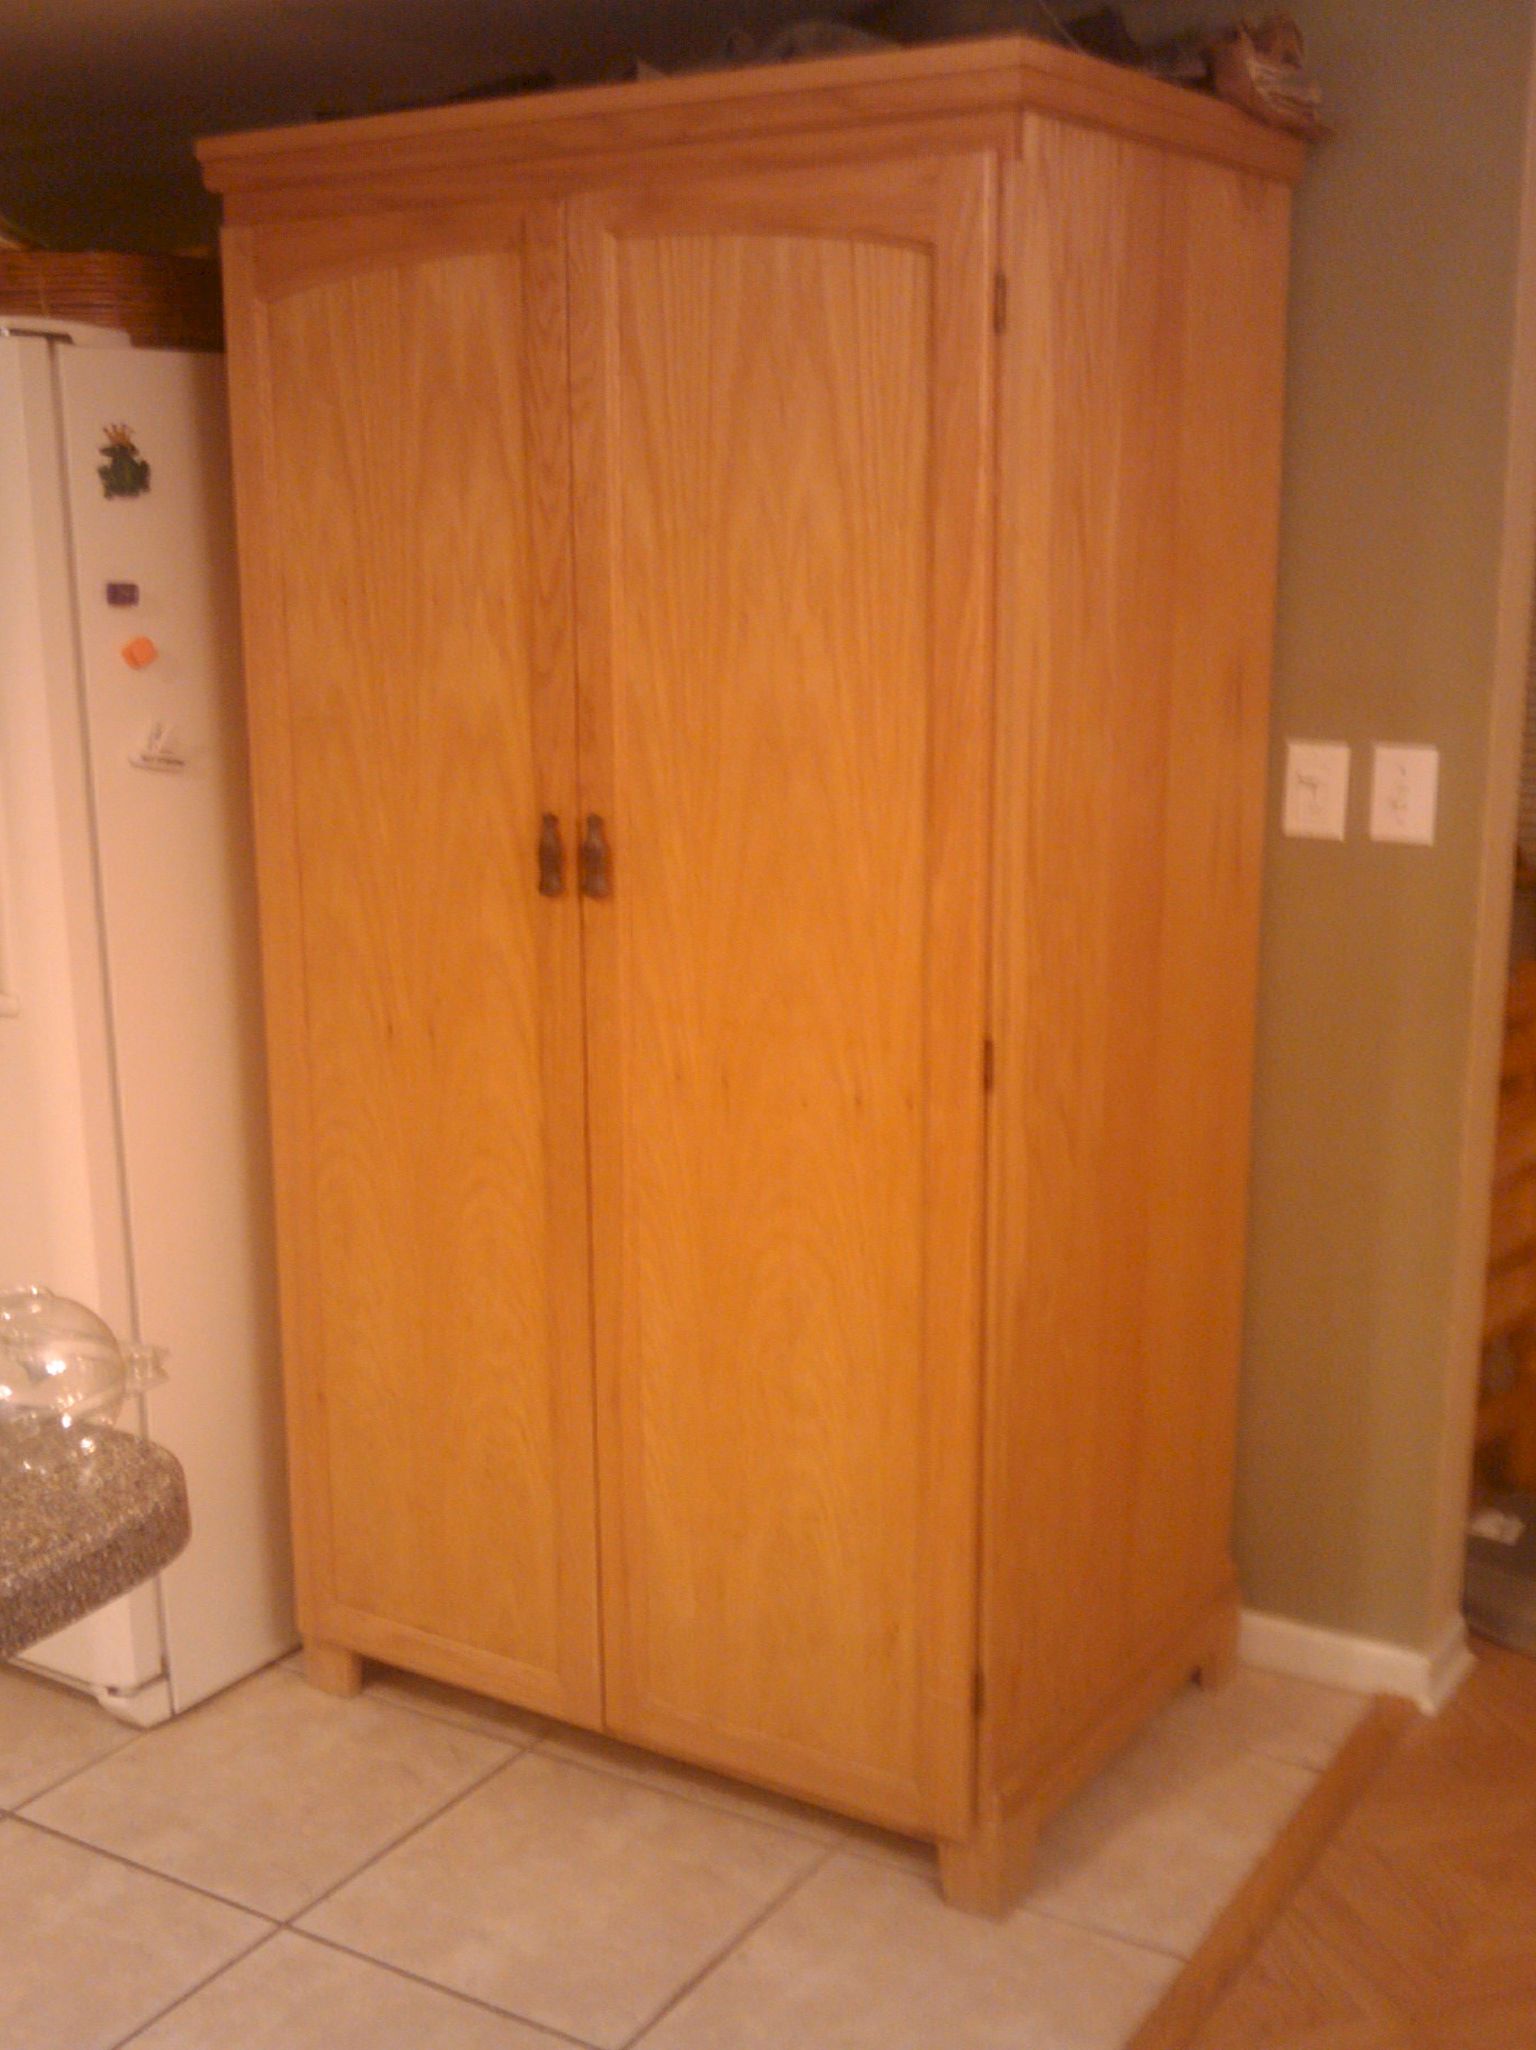 Stand Alone Kitchen Pantry Cabinet photo - 1